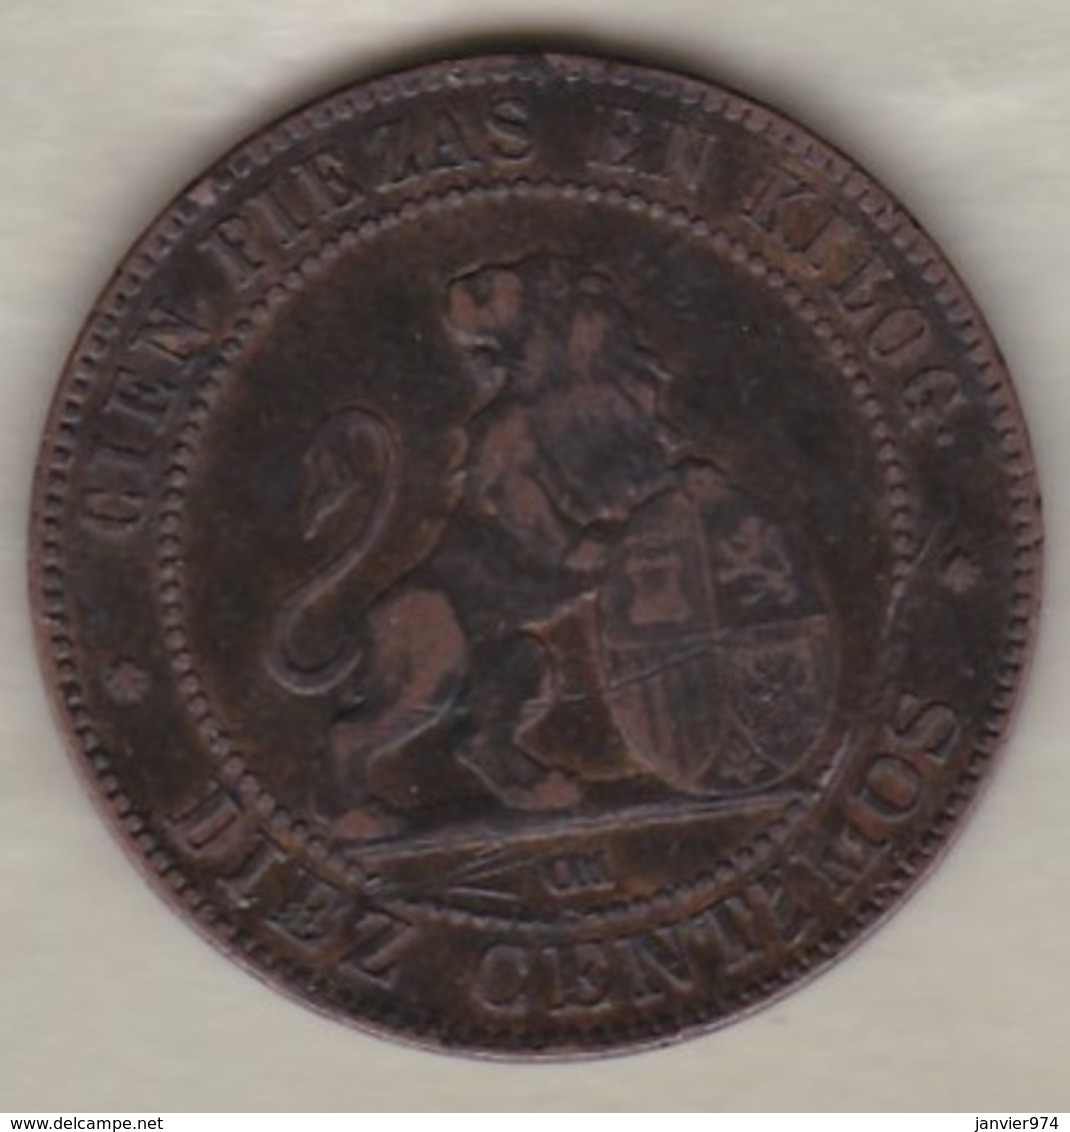 Provisional Government, 10 Centimos 1870 - First Minting